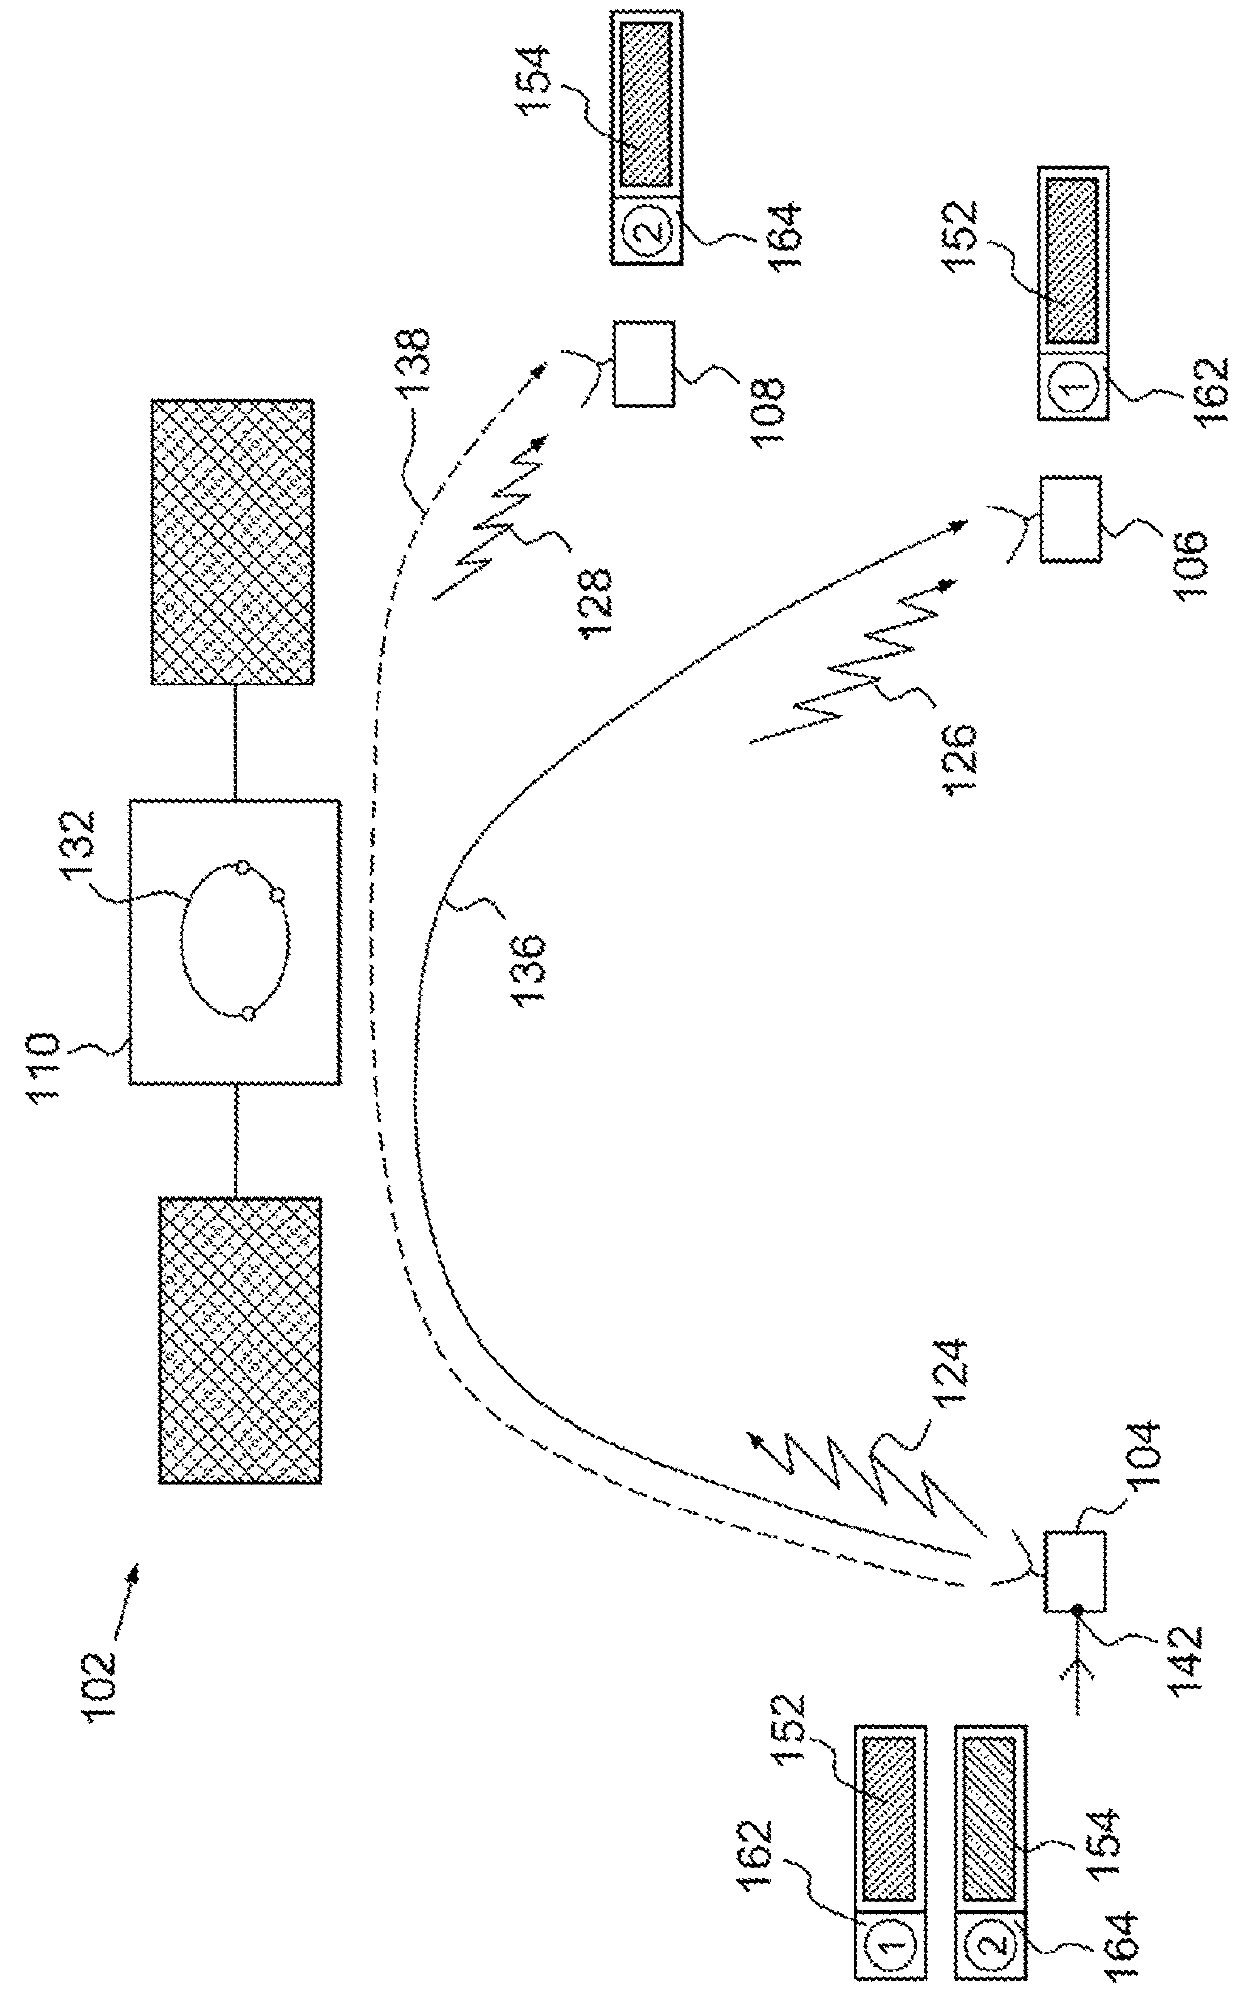 Method for transparent on-board routing of data packets at very high bit rate in a space telecommunication system using a network of at least one regenerative satellite(s)